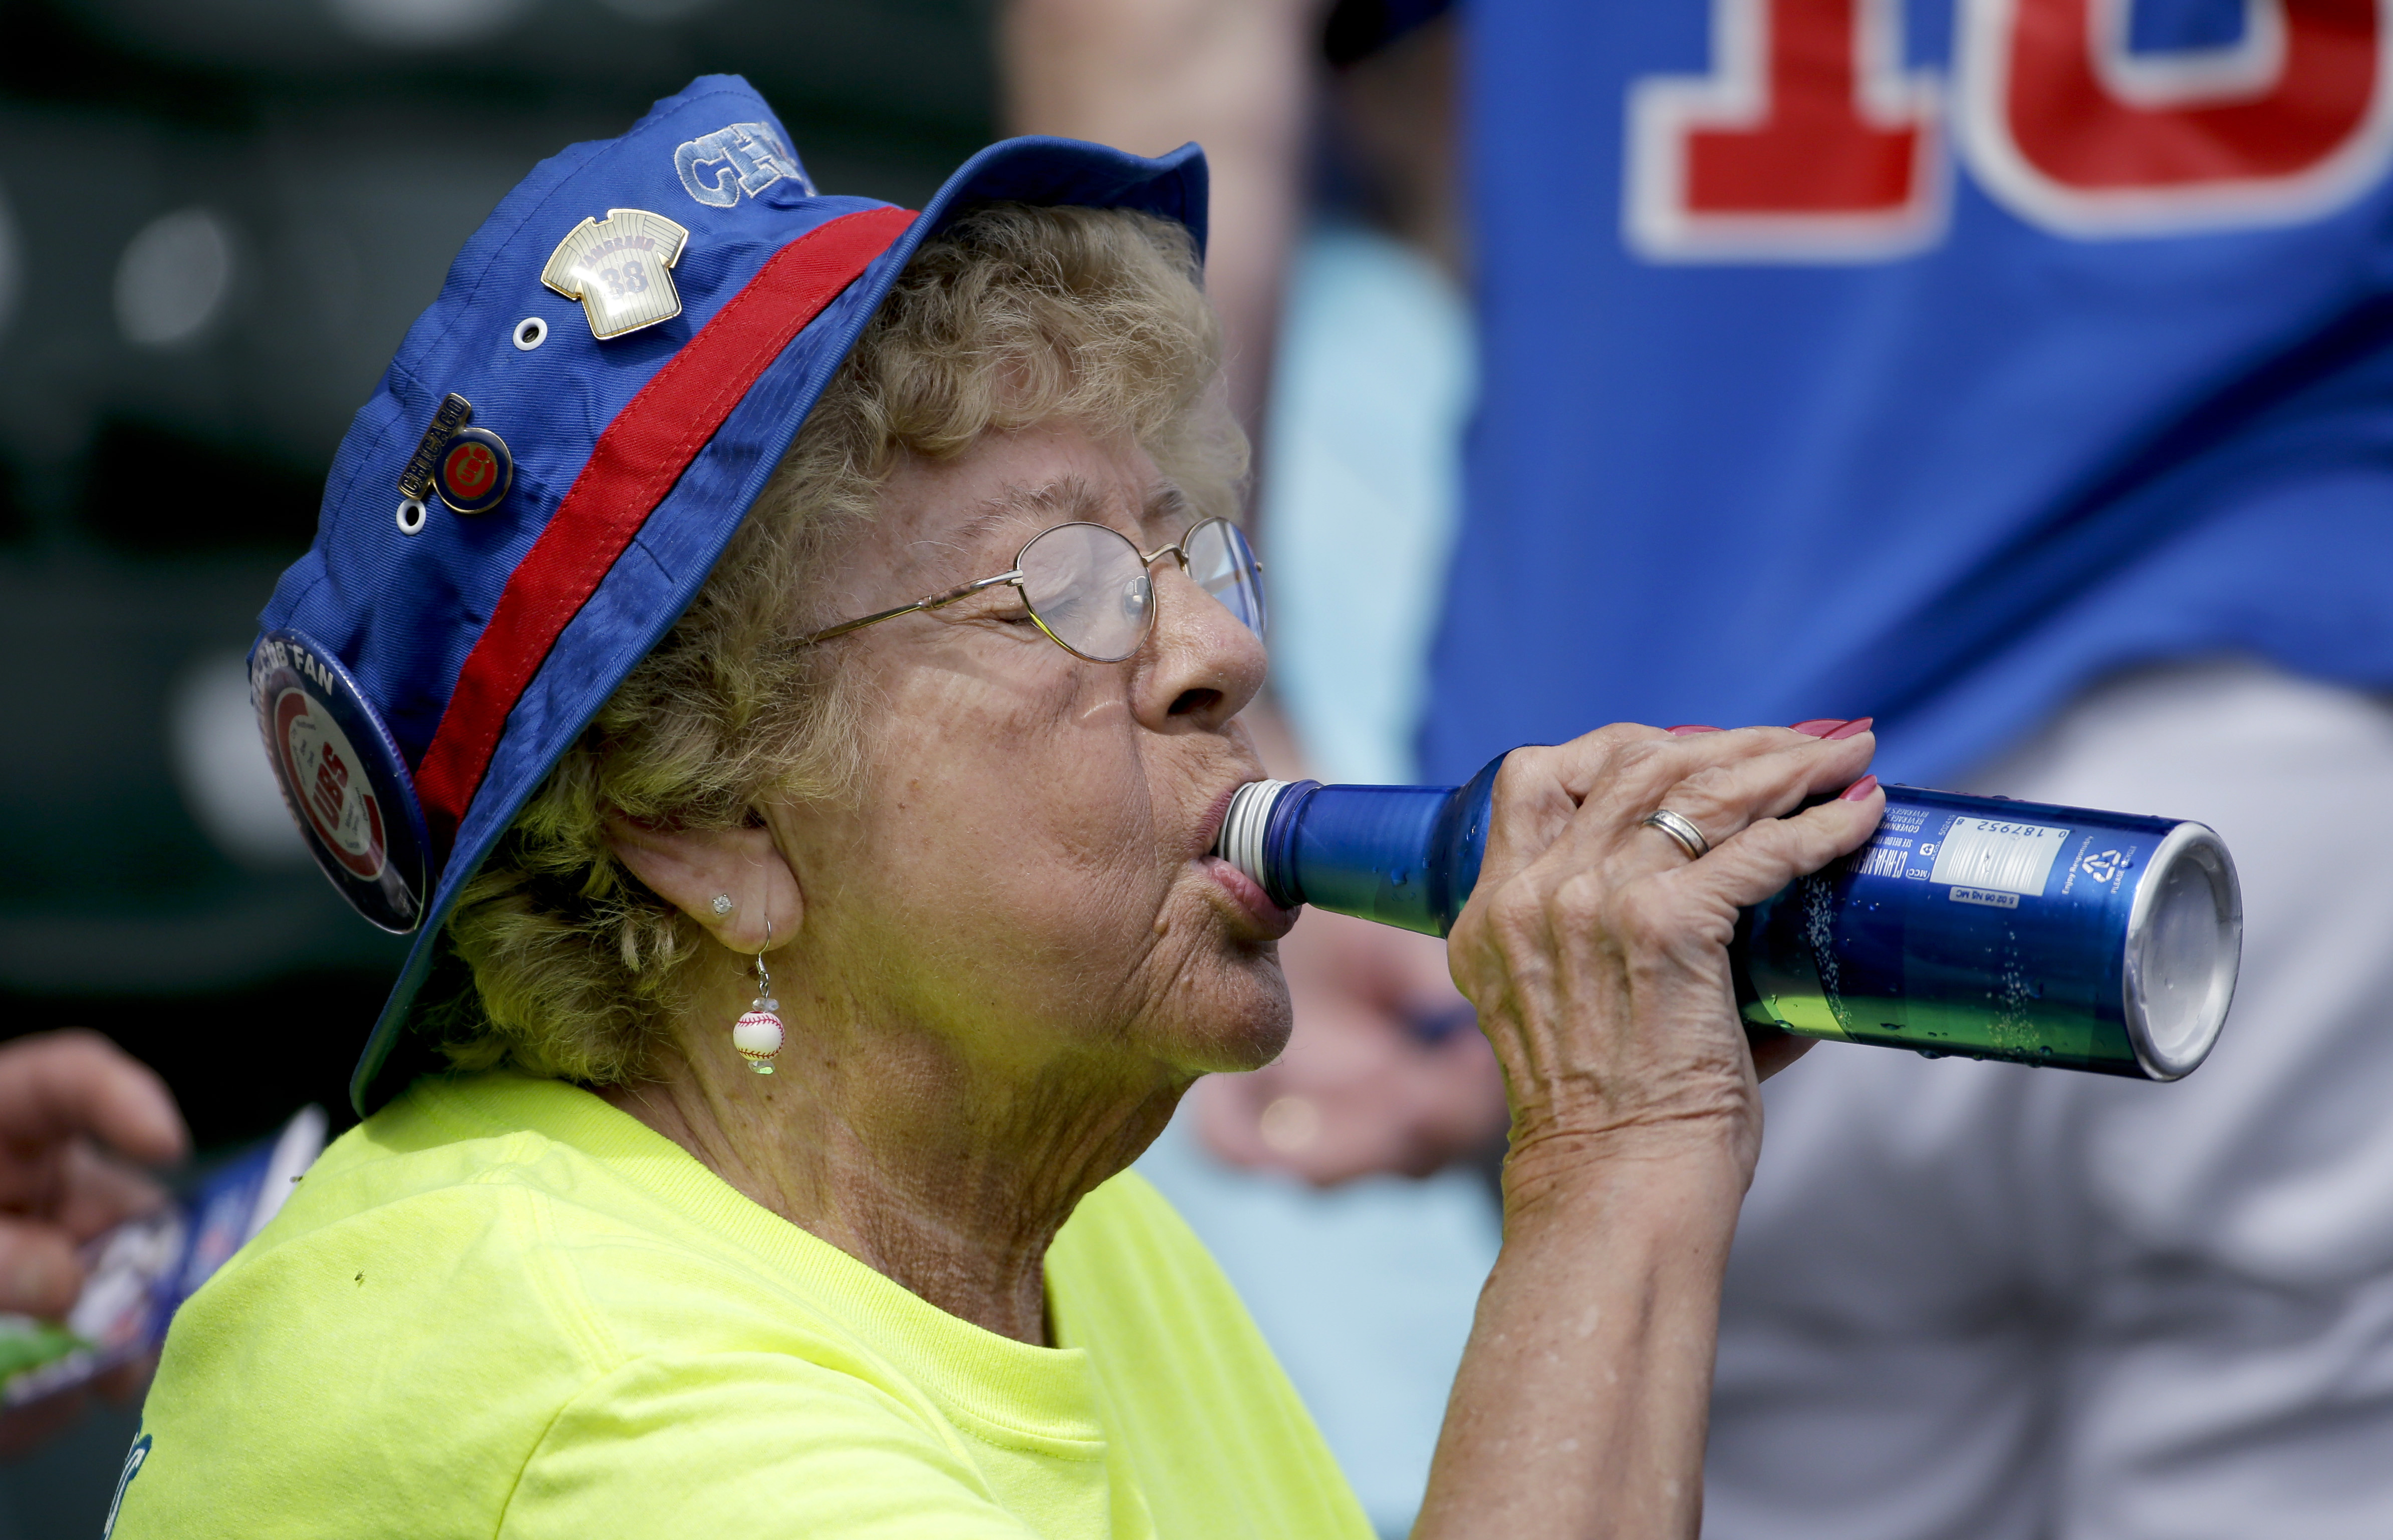 Chicago Cubs fans not as drunk as you think they are